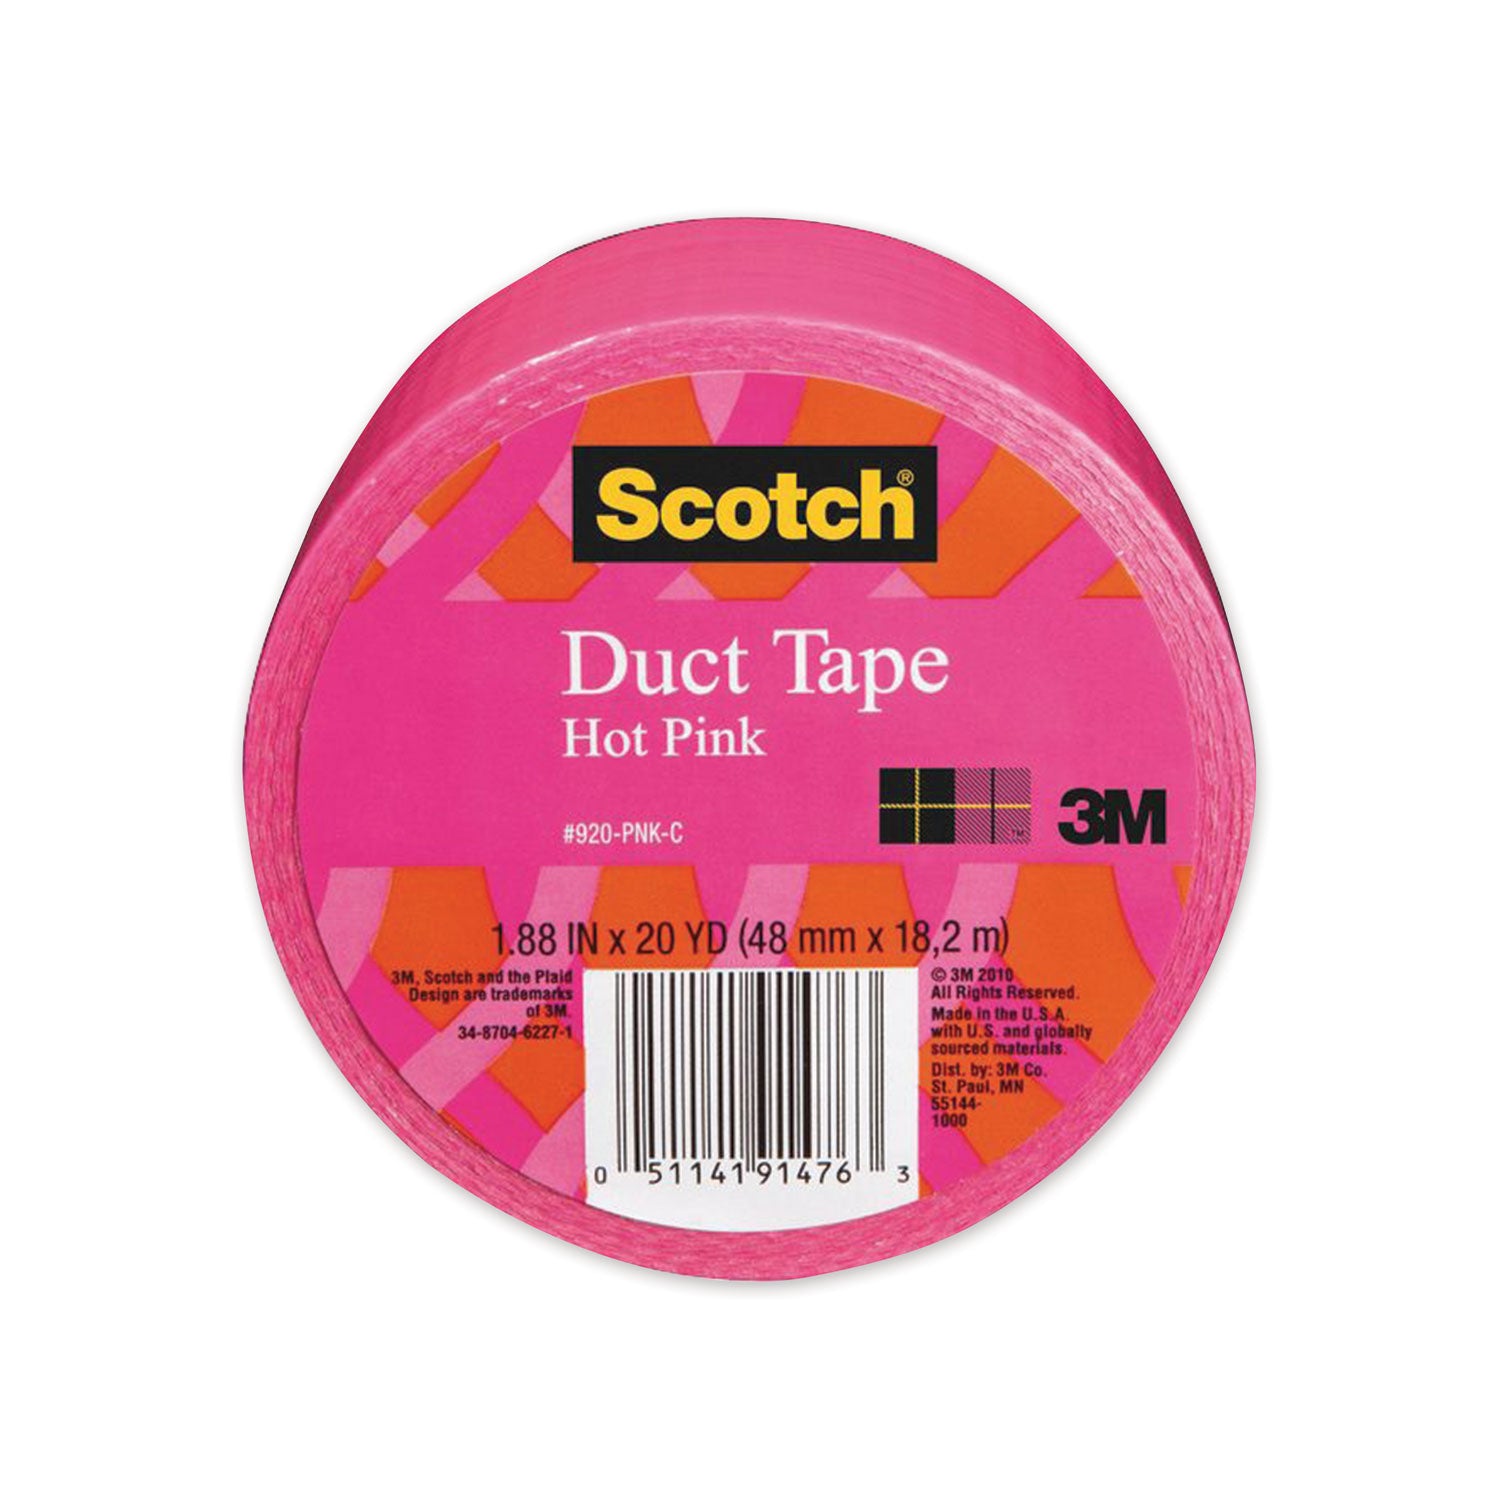 duct-tape-188-x-20-yds-hot-pink_mmm70005058170 - 2